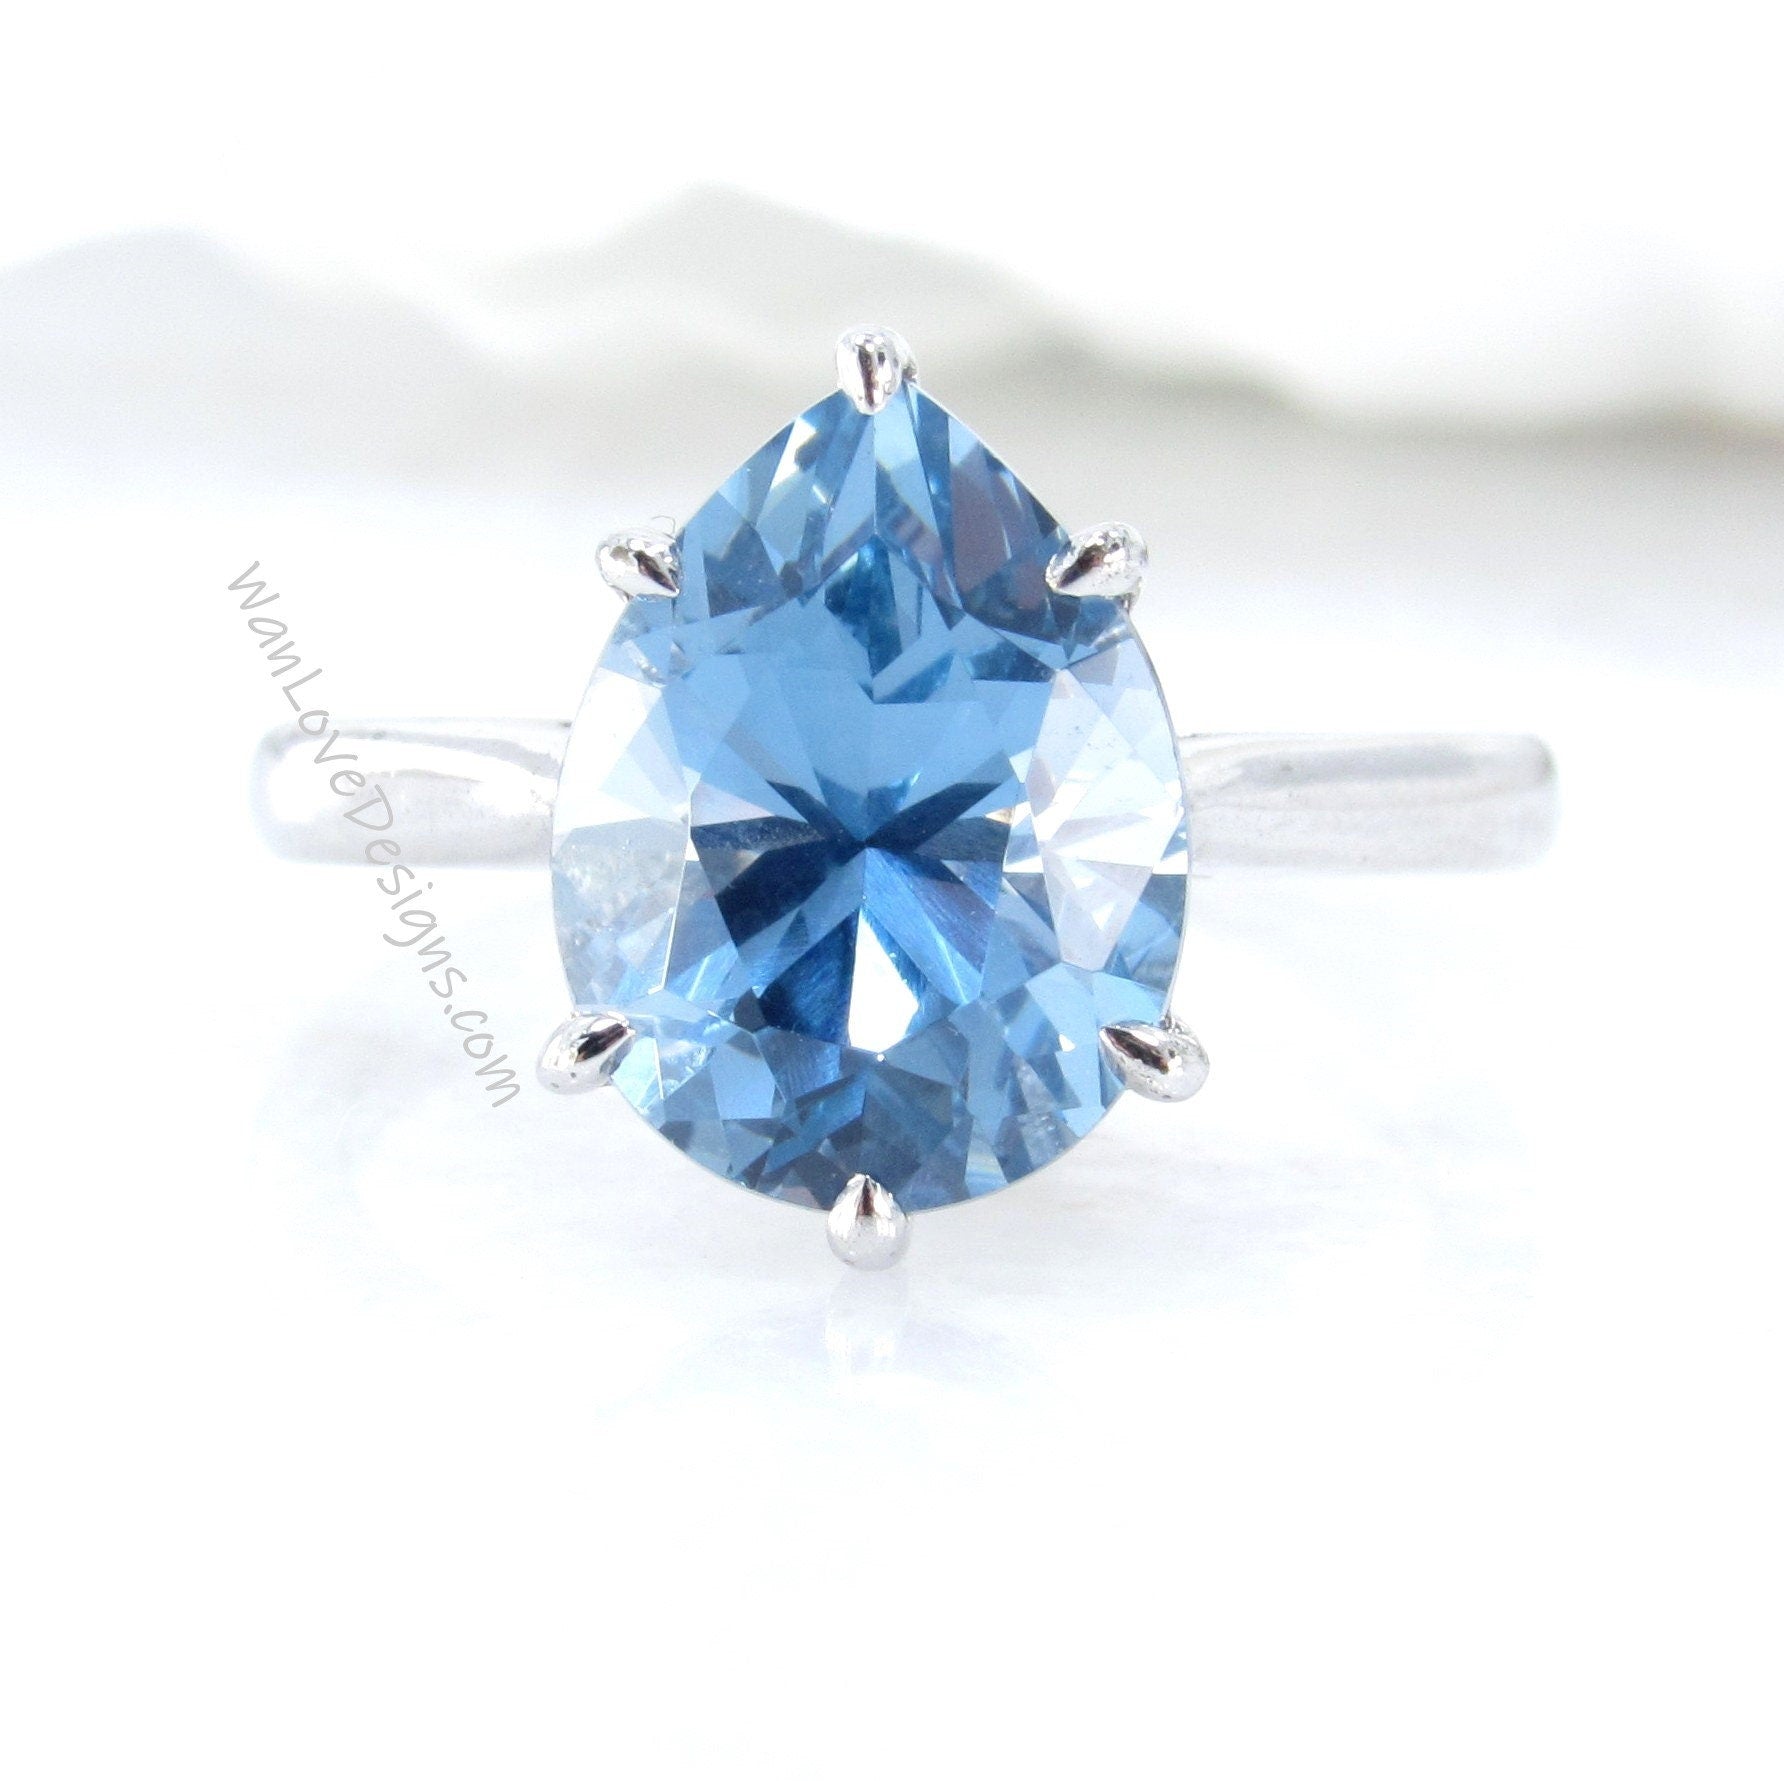 4.5ct Aquamarine Blue Spinel 6 Prong Pear Solitaire Engagement Ring, Large Gemstone Cathedral Ring, Wedding Anniversary Ring, Ready to ship Wan Love Designs